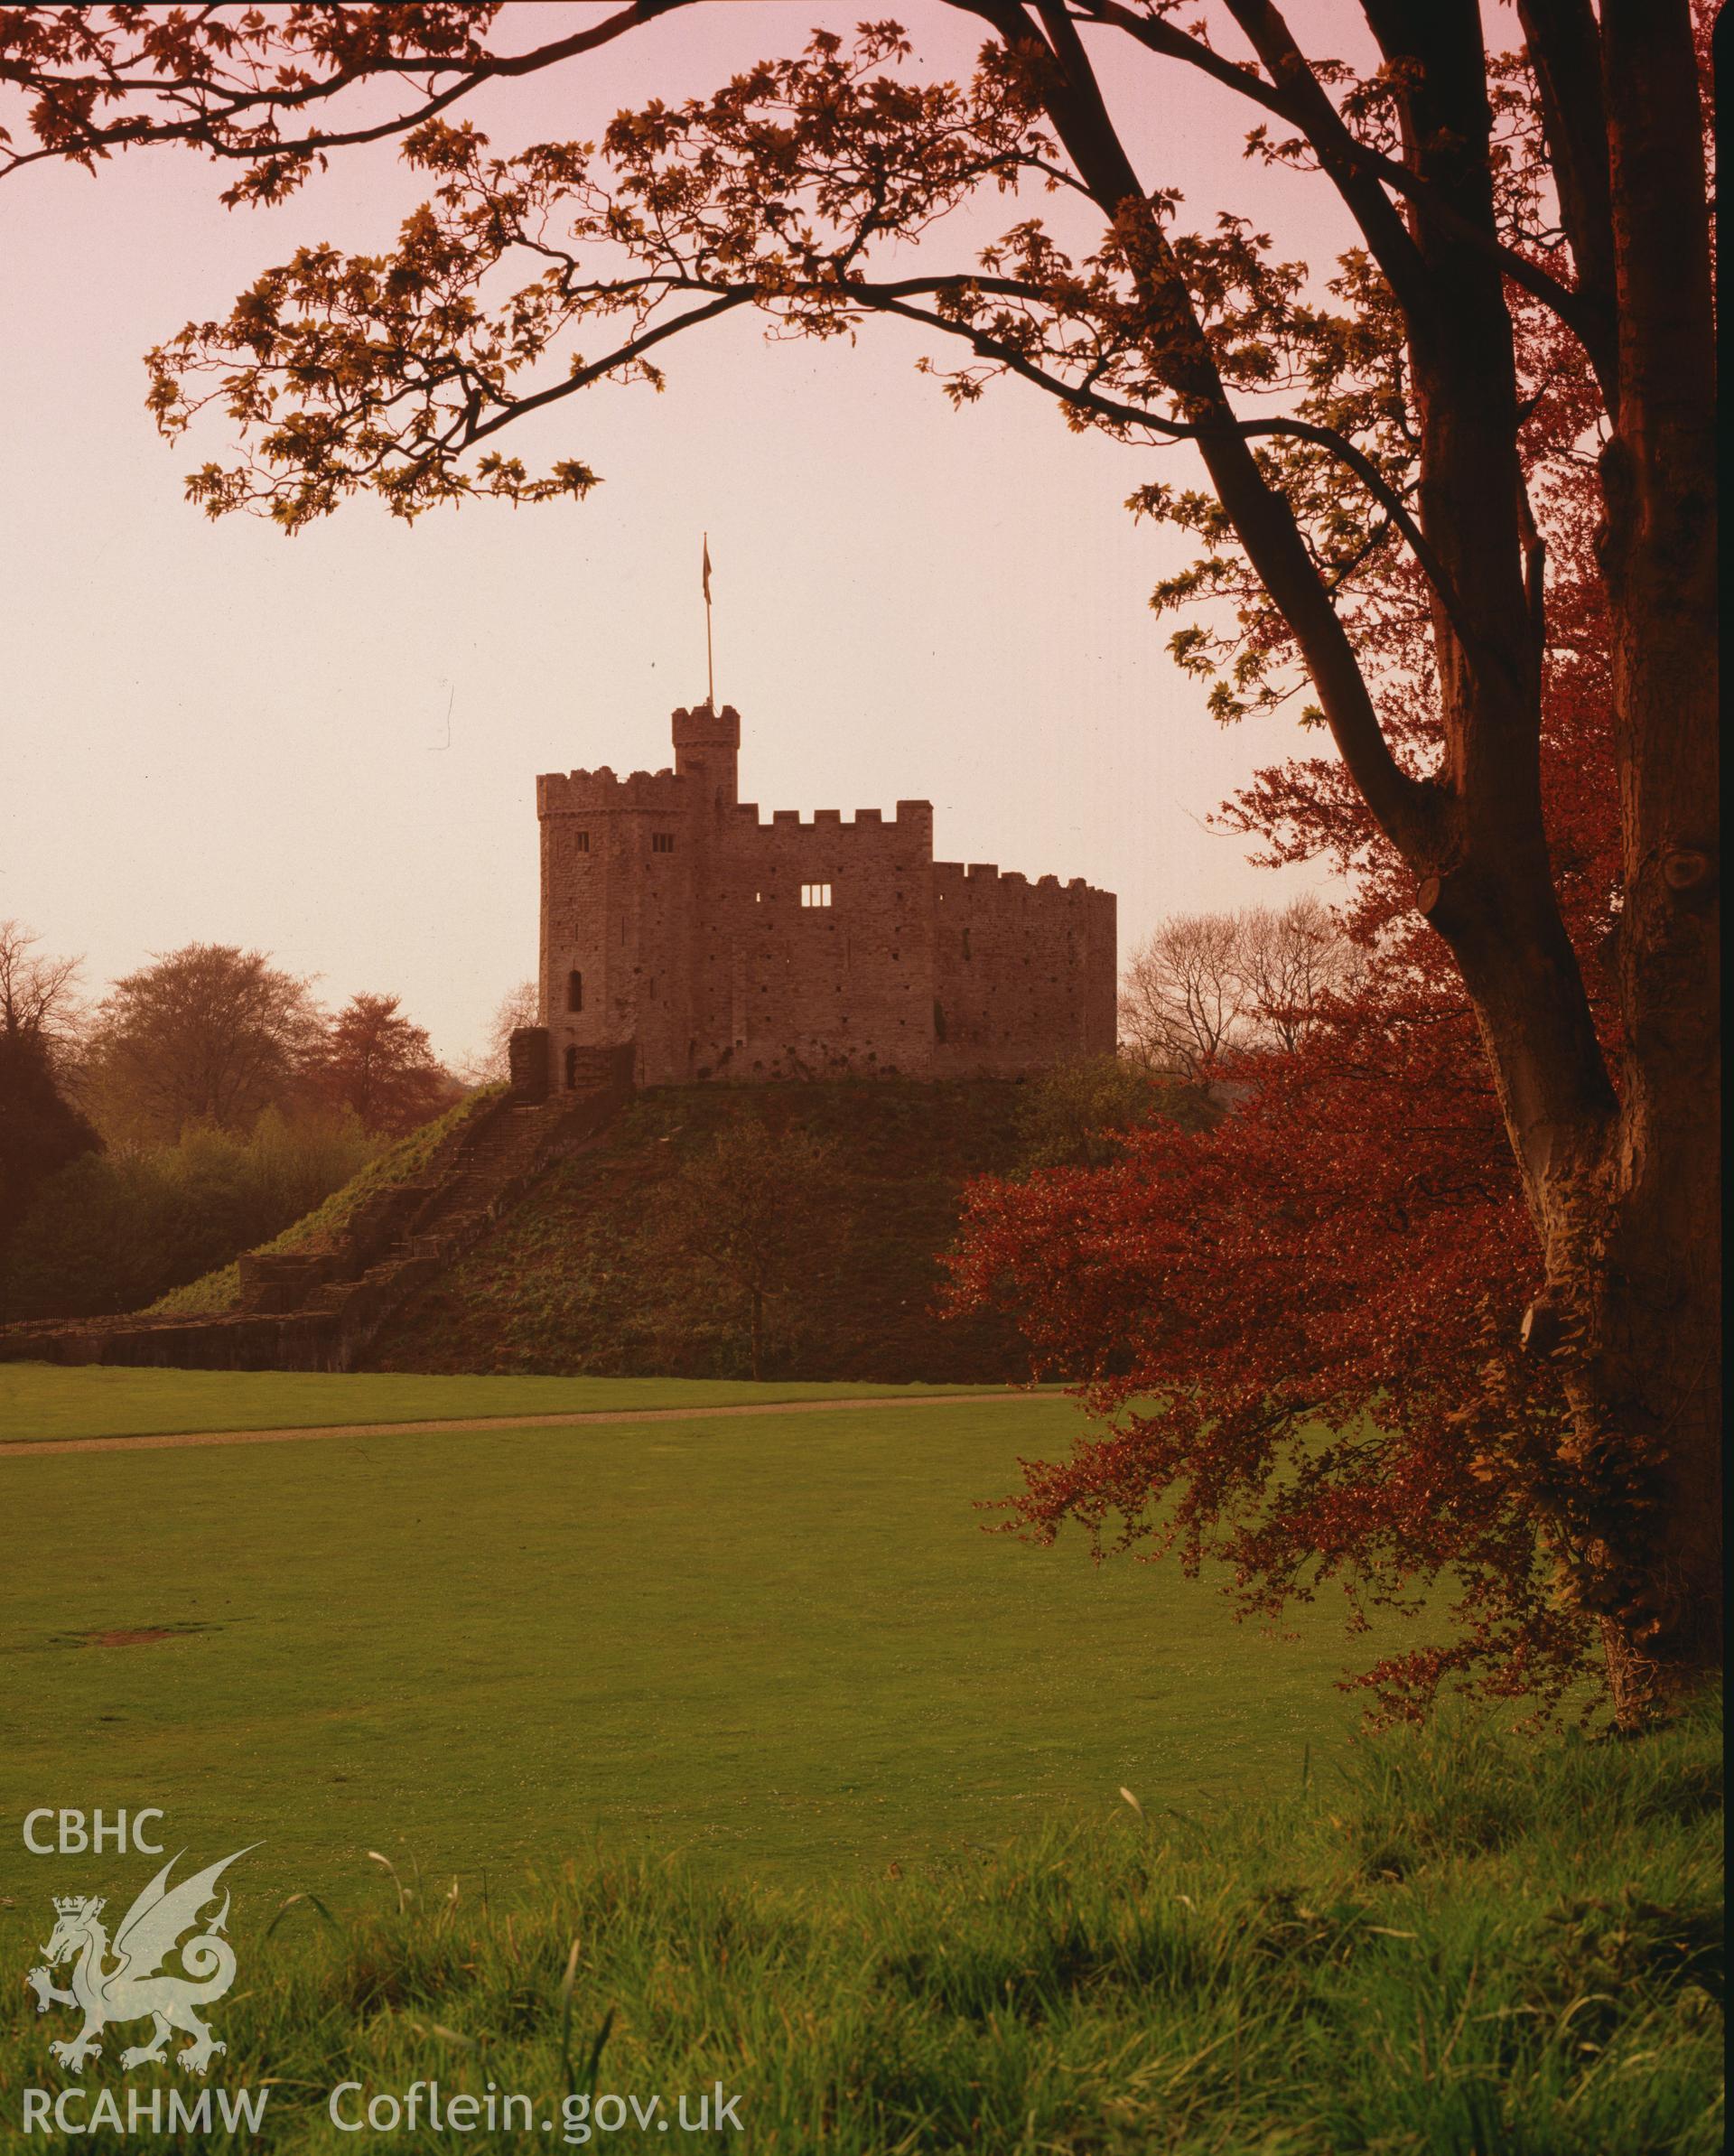 RCAHMW colour transparency of a general view of Cardiff Castle at sunset.